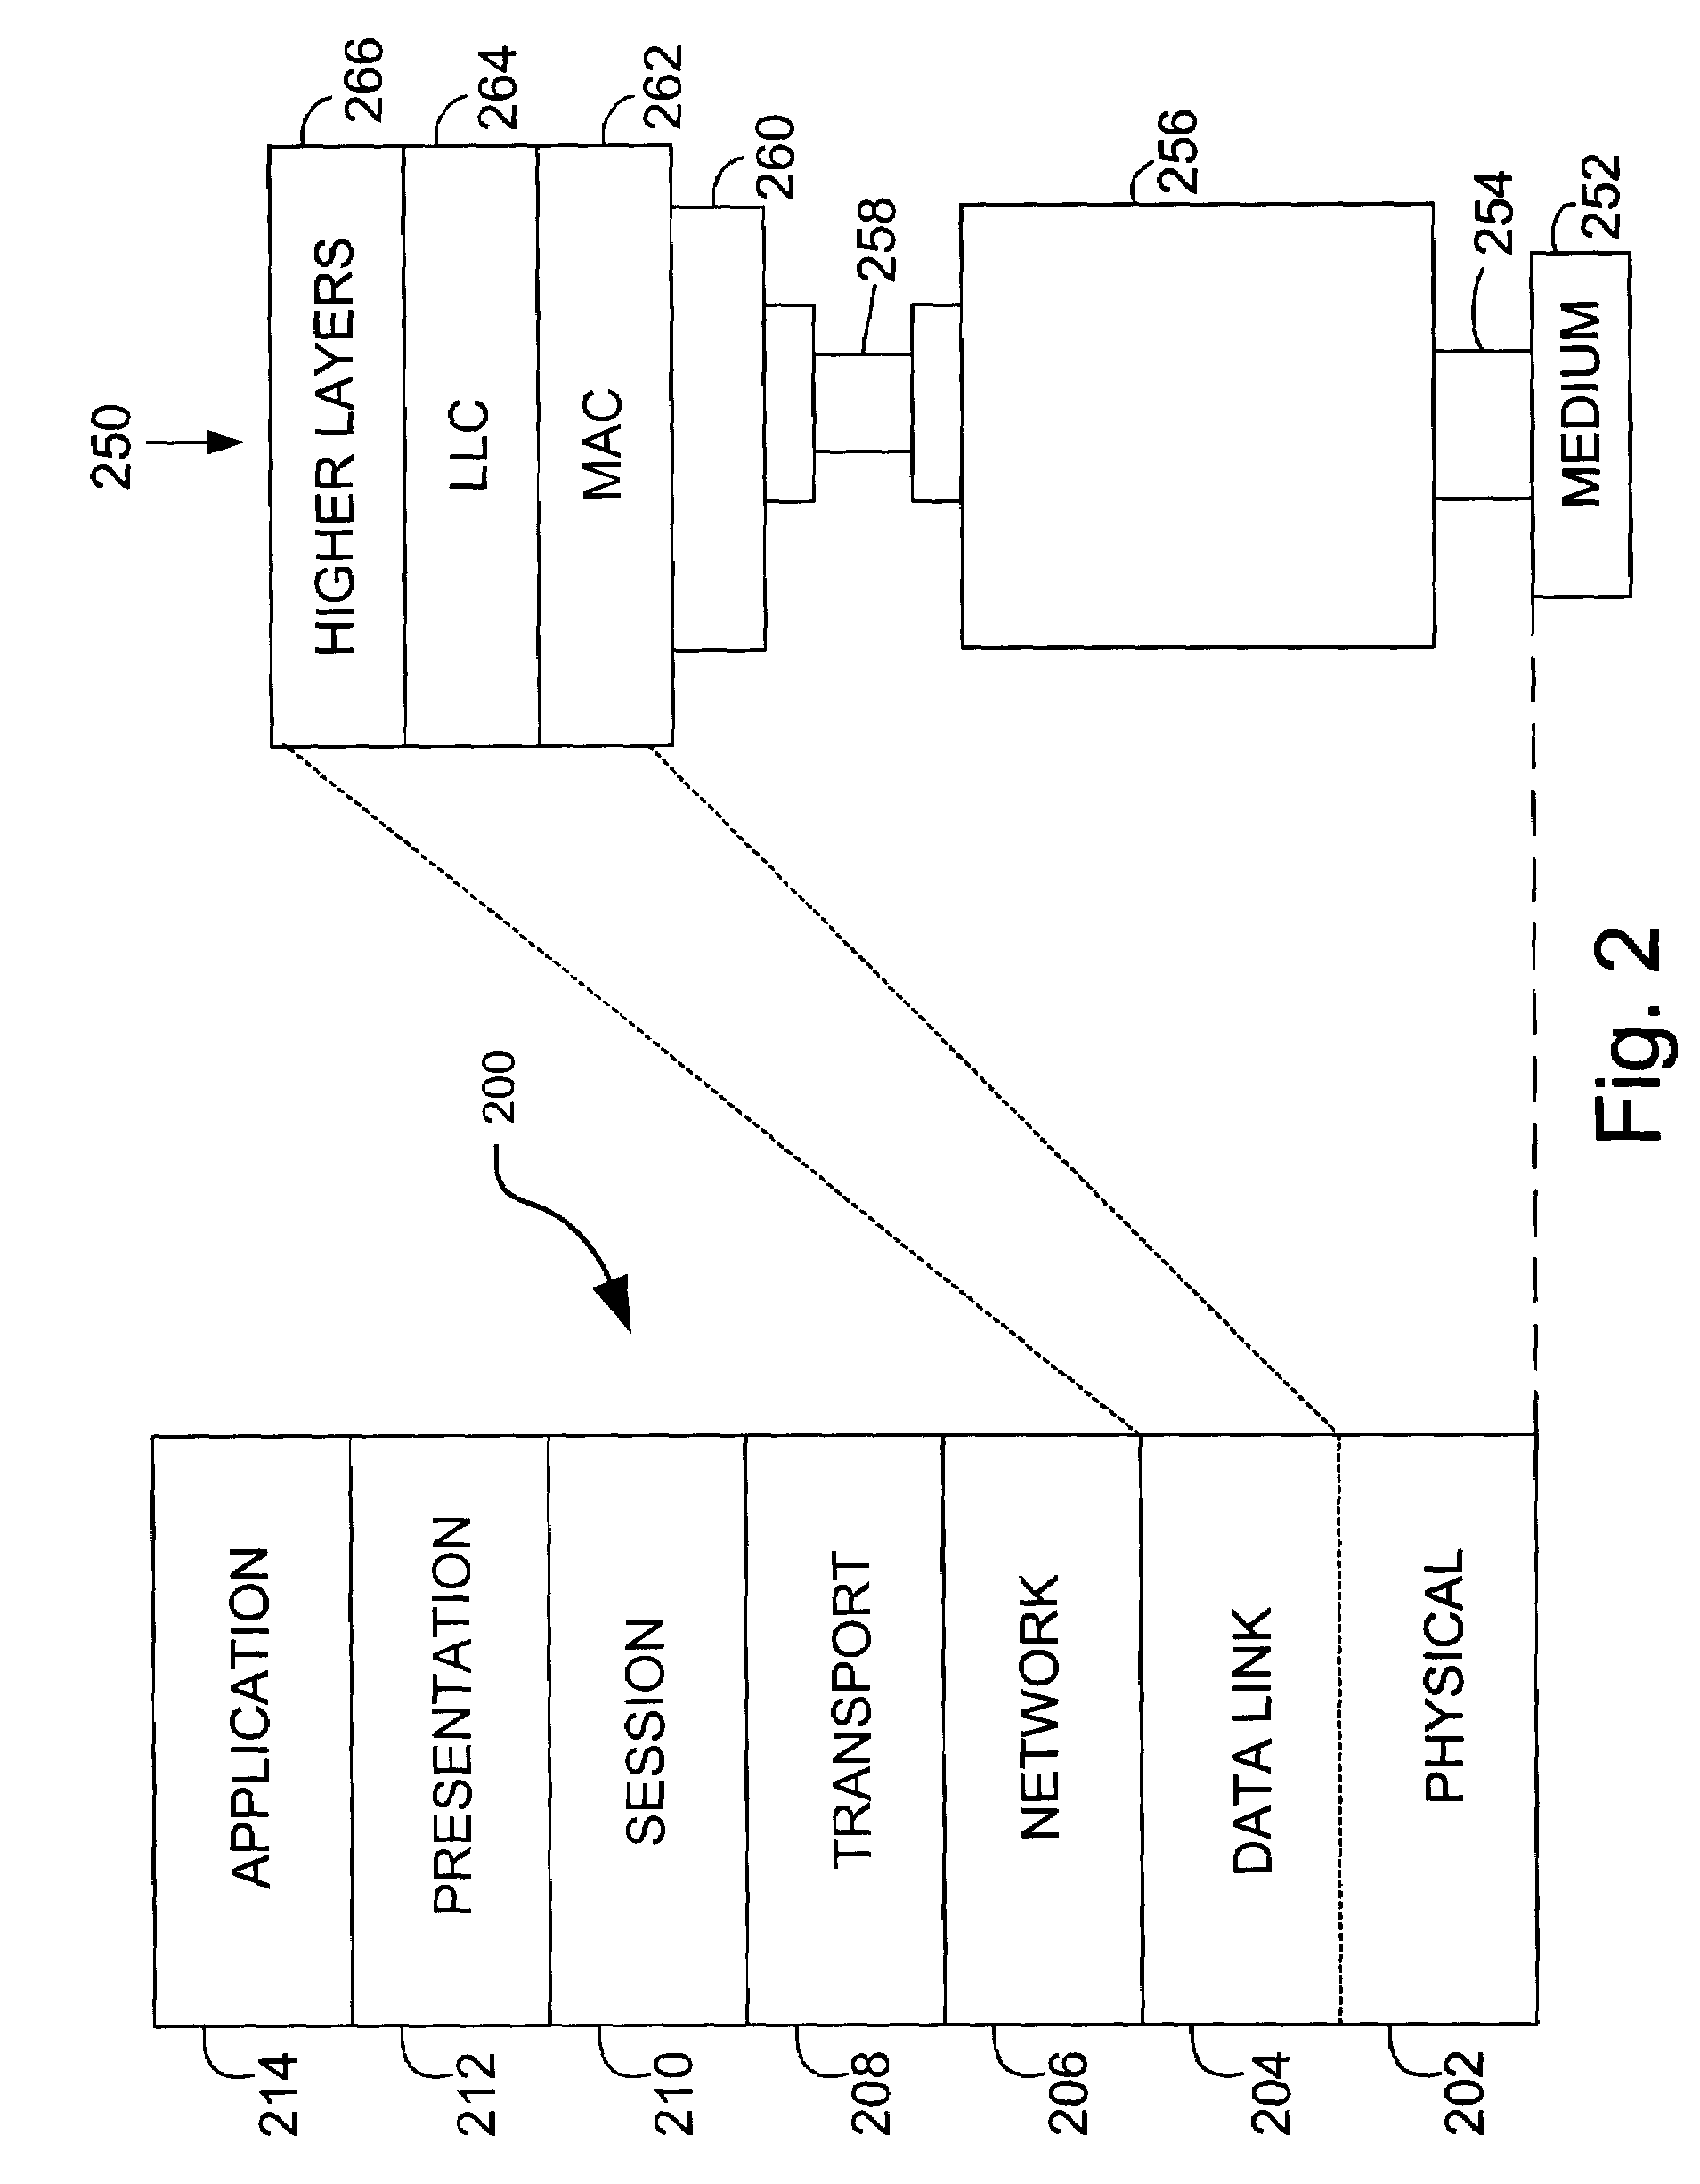 Method and apparatus for performing wake on LAN power management